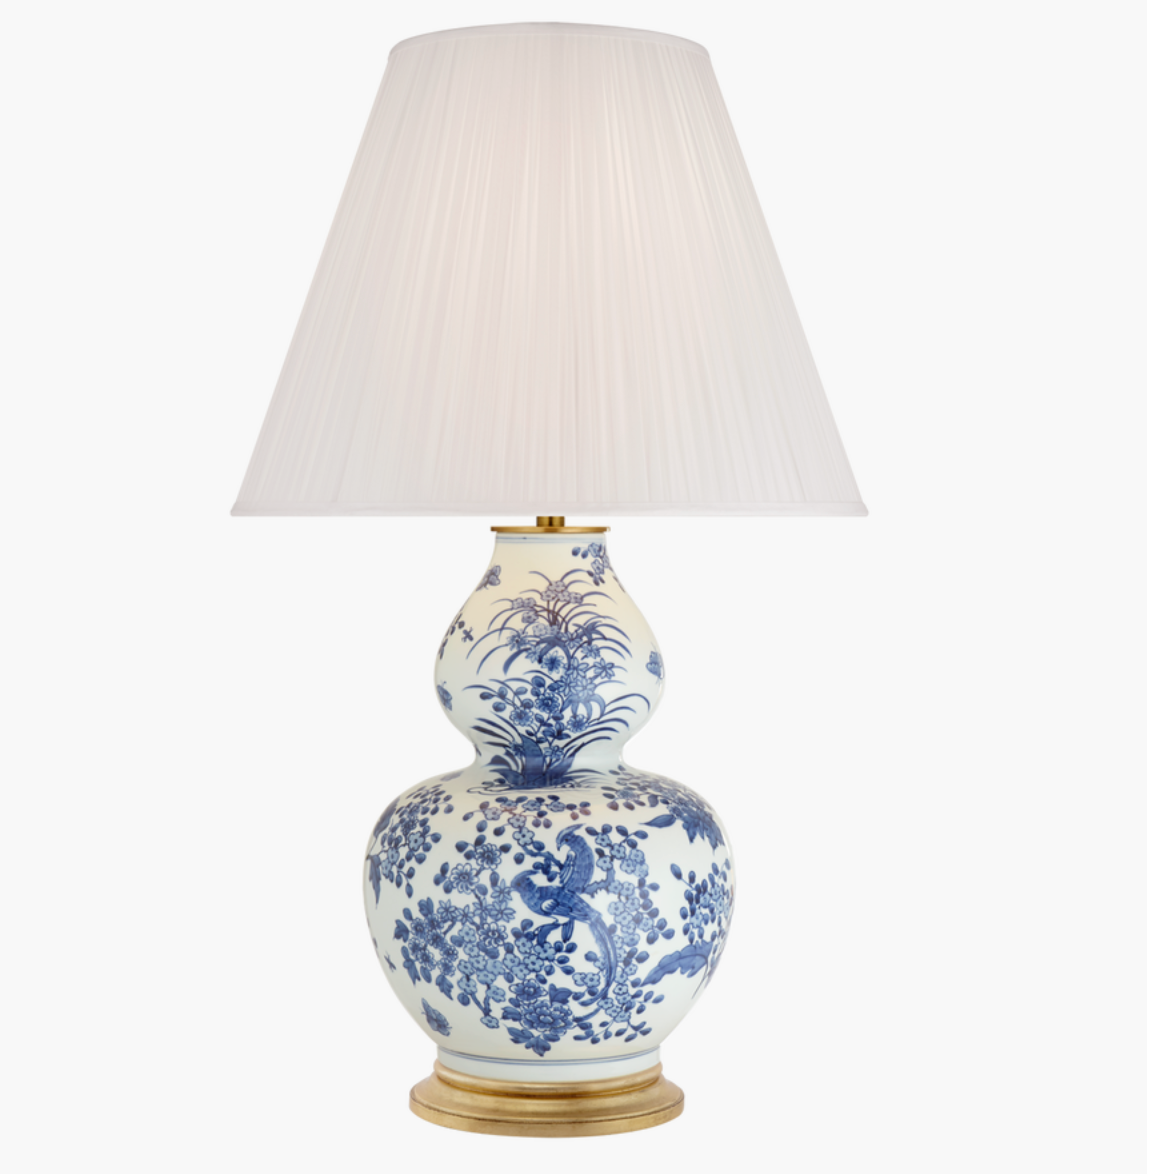 Ralph Lauren Blue and White Table Lamp